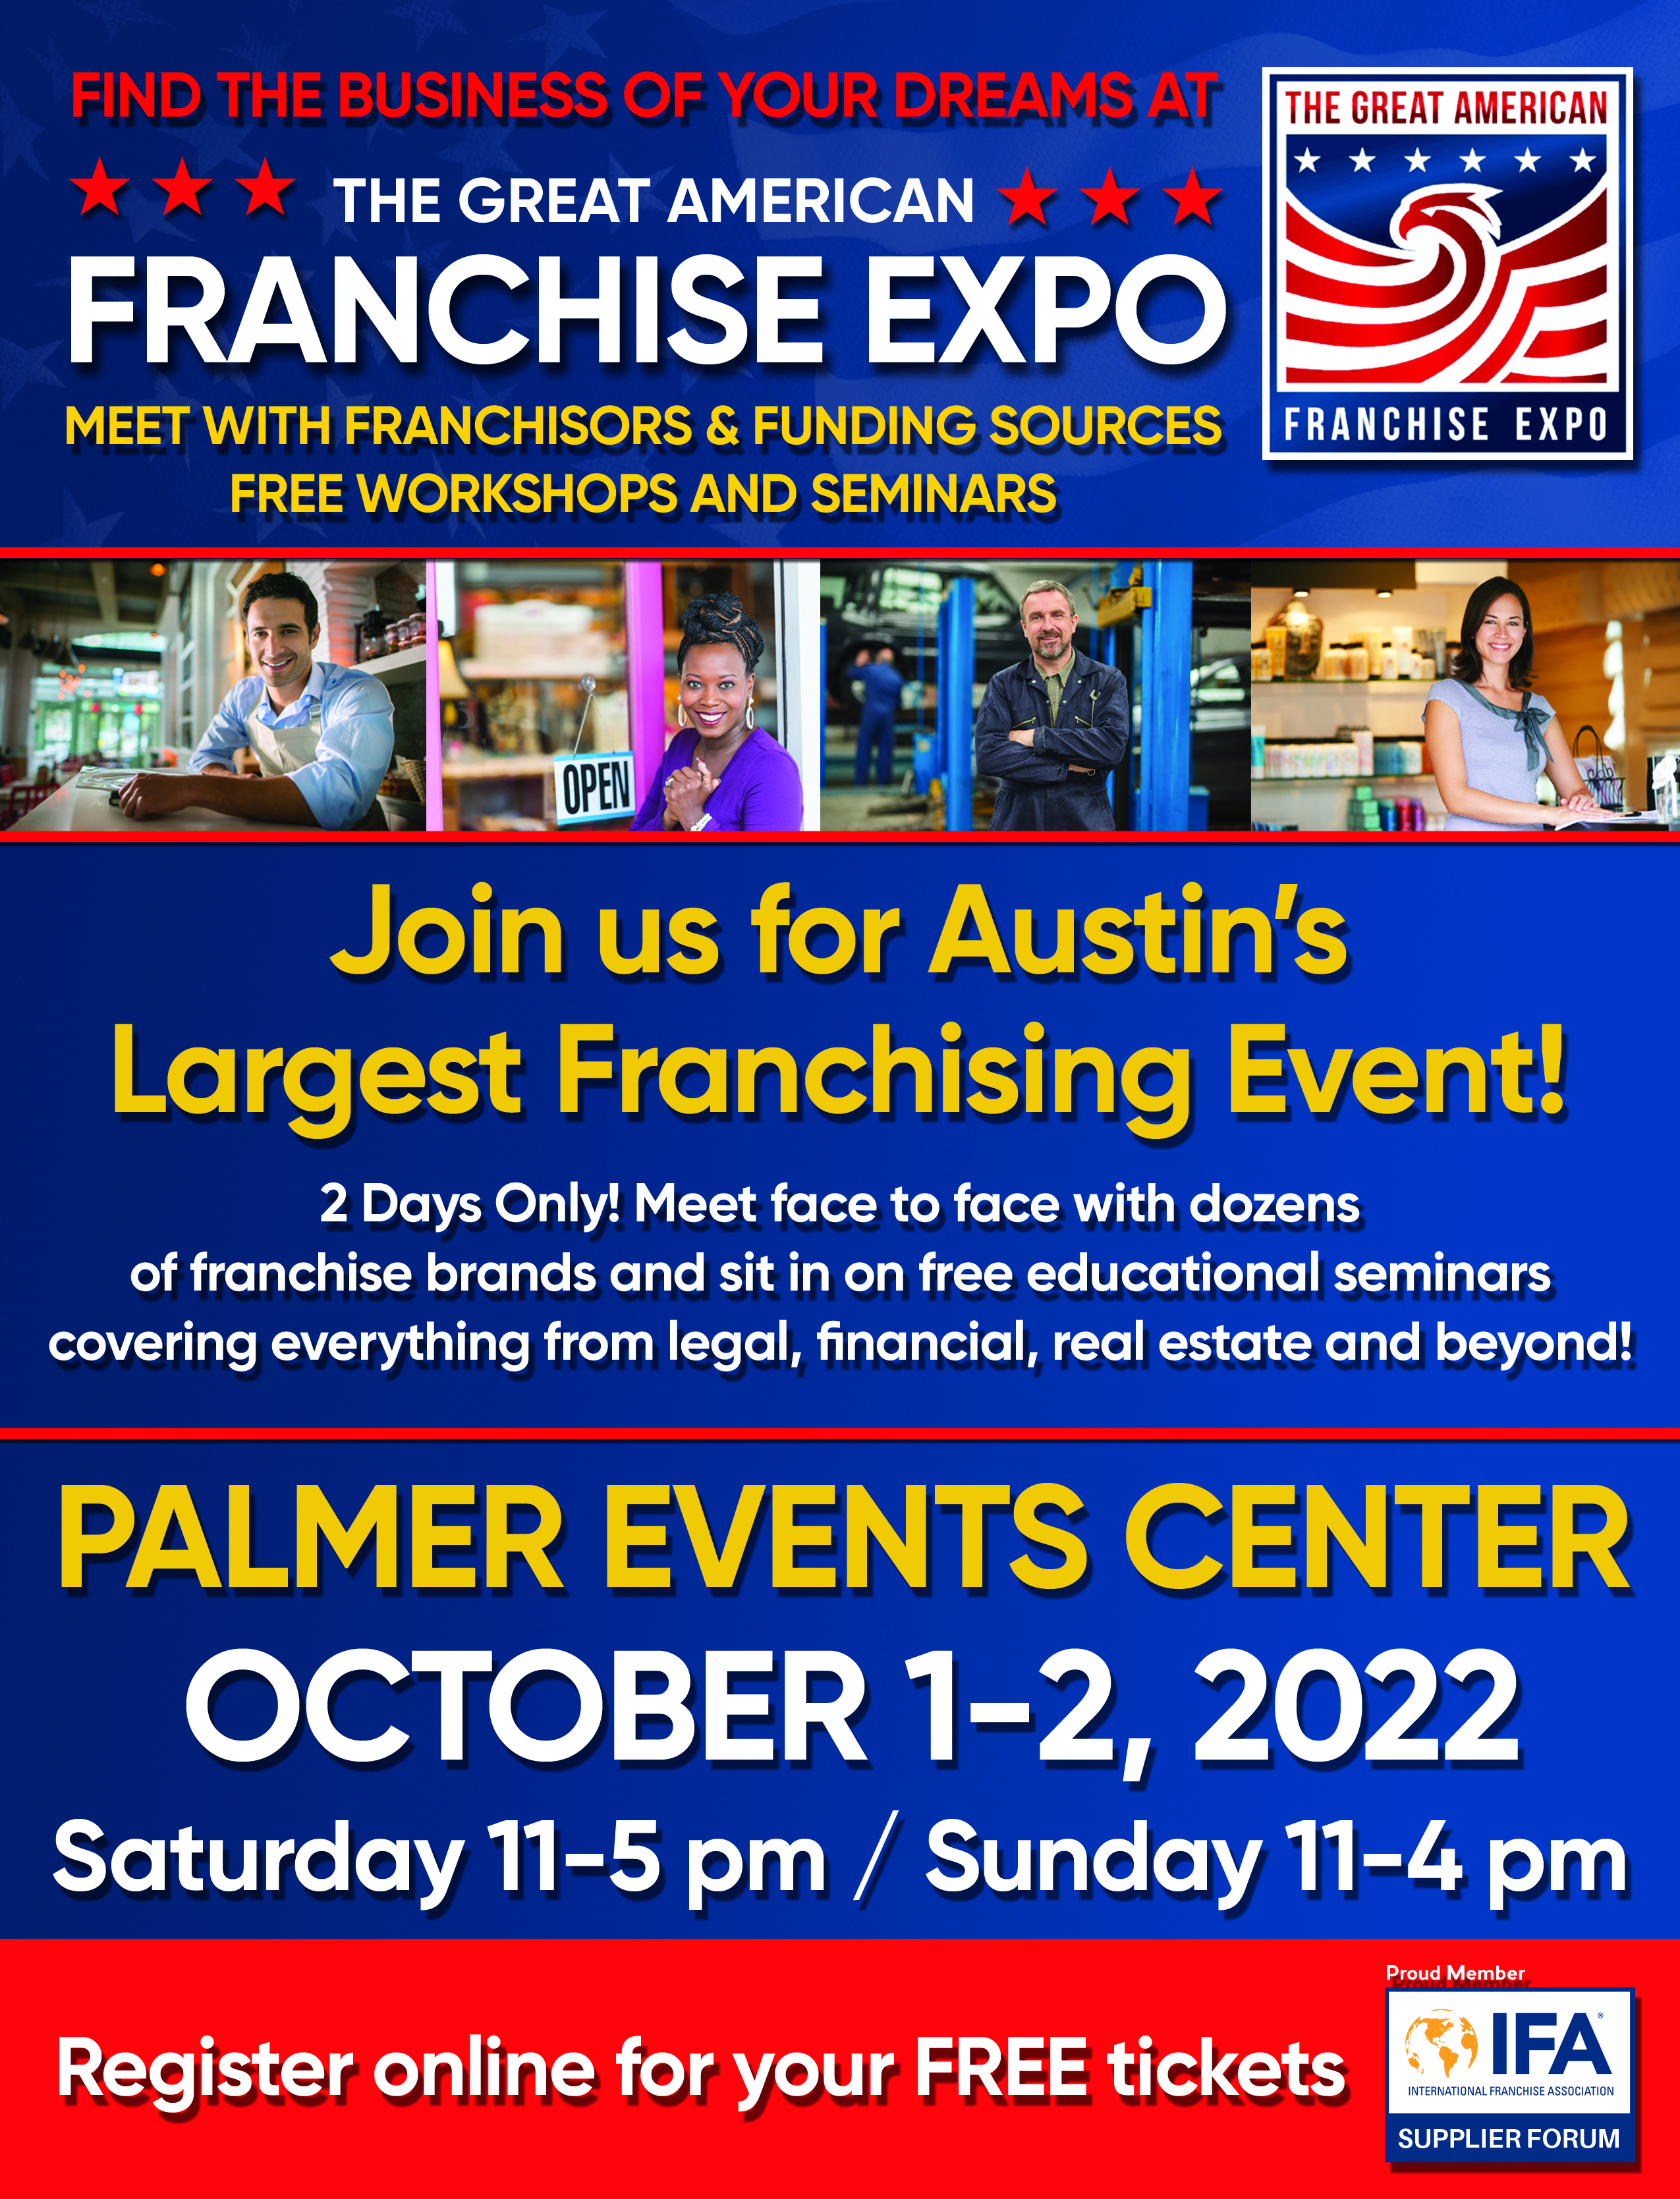 The Great American Franchise Expo